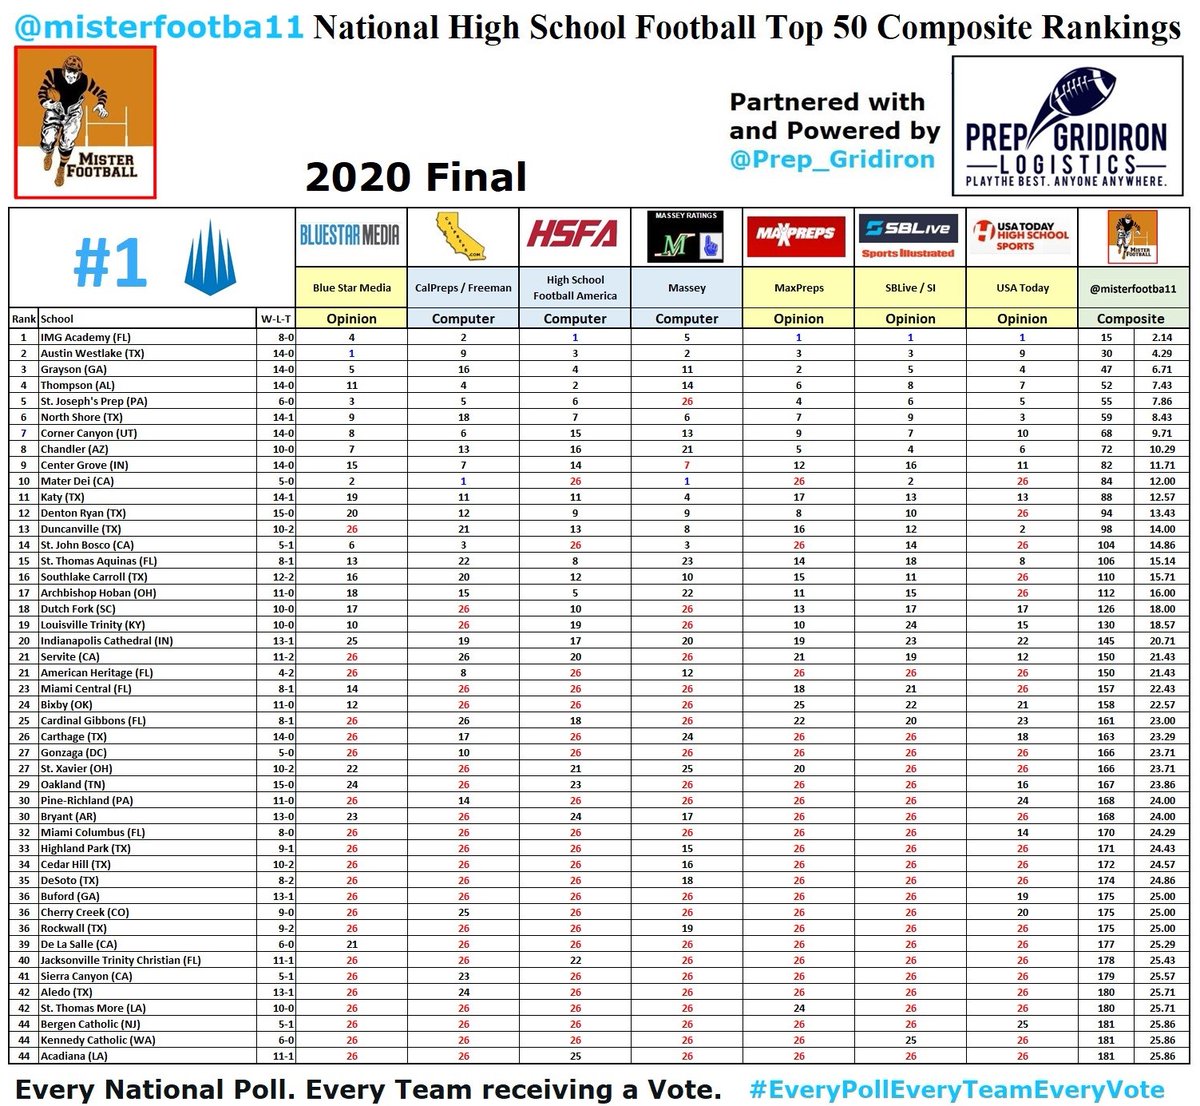 Congratulations Ascenders on finishing #1 in the 2020 @misterfootba11 National High School Football Top 50 Composite Rankings Partnered with and Powered by @Prep_Gridiron. @IMGAFootball @IMGAcademy @_thebillymiller @CoachGouldQB @FloridaMaxPreps @PrepRedzoneFL @FLVarsityRivals